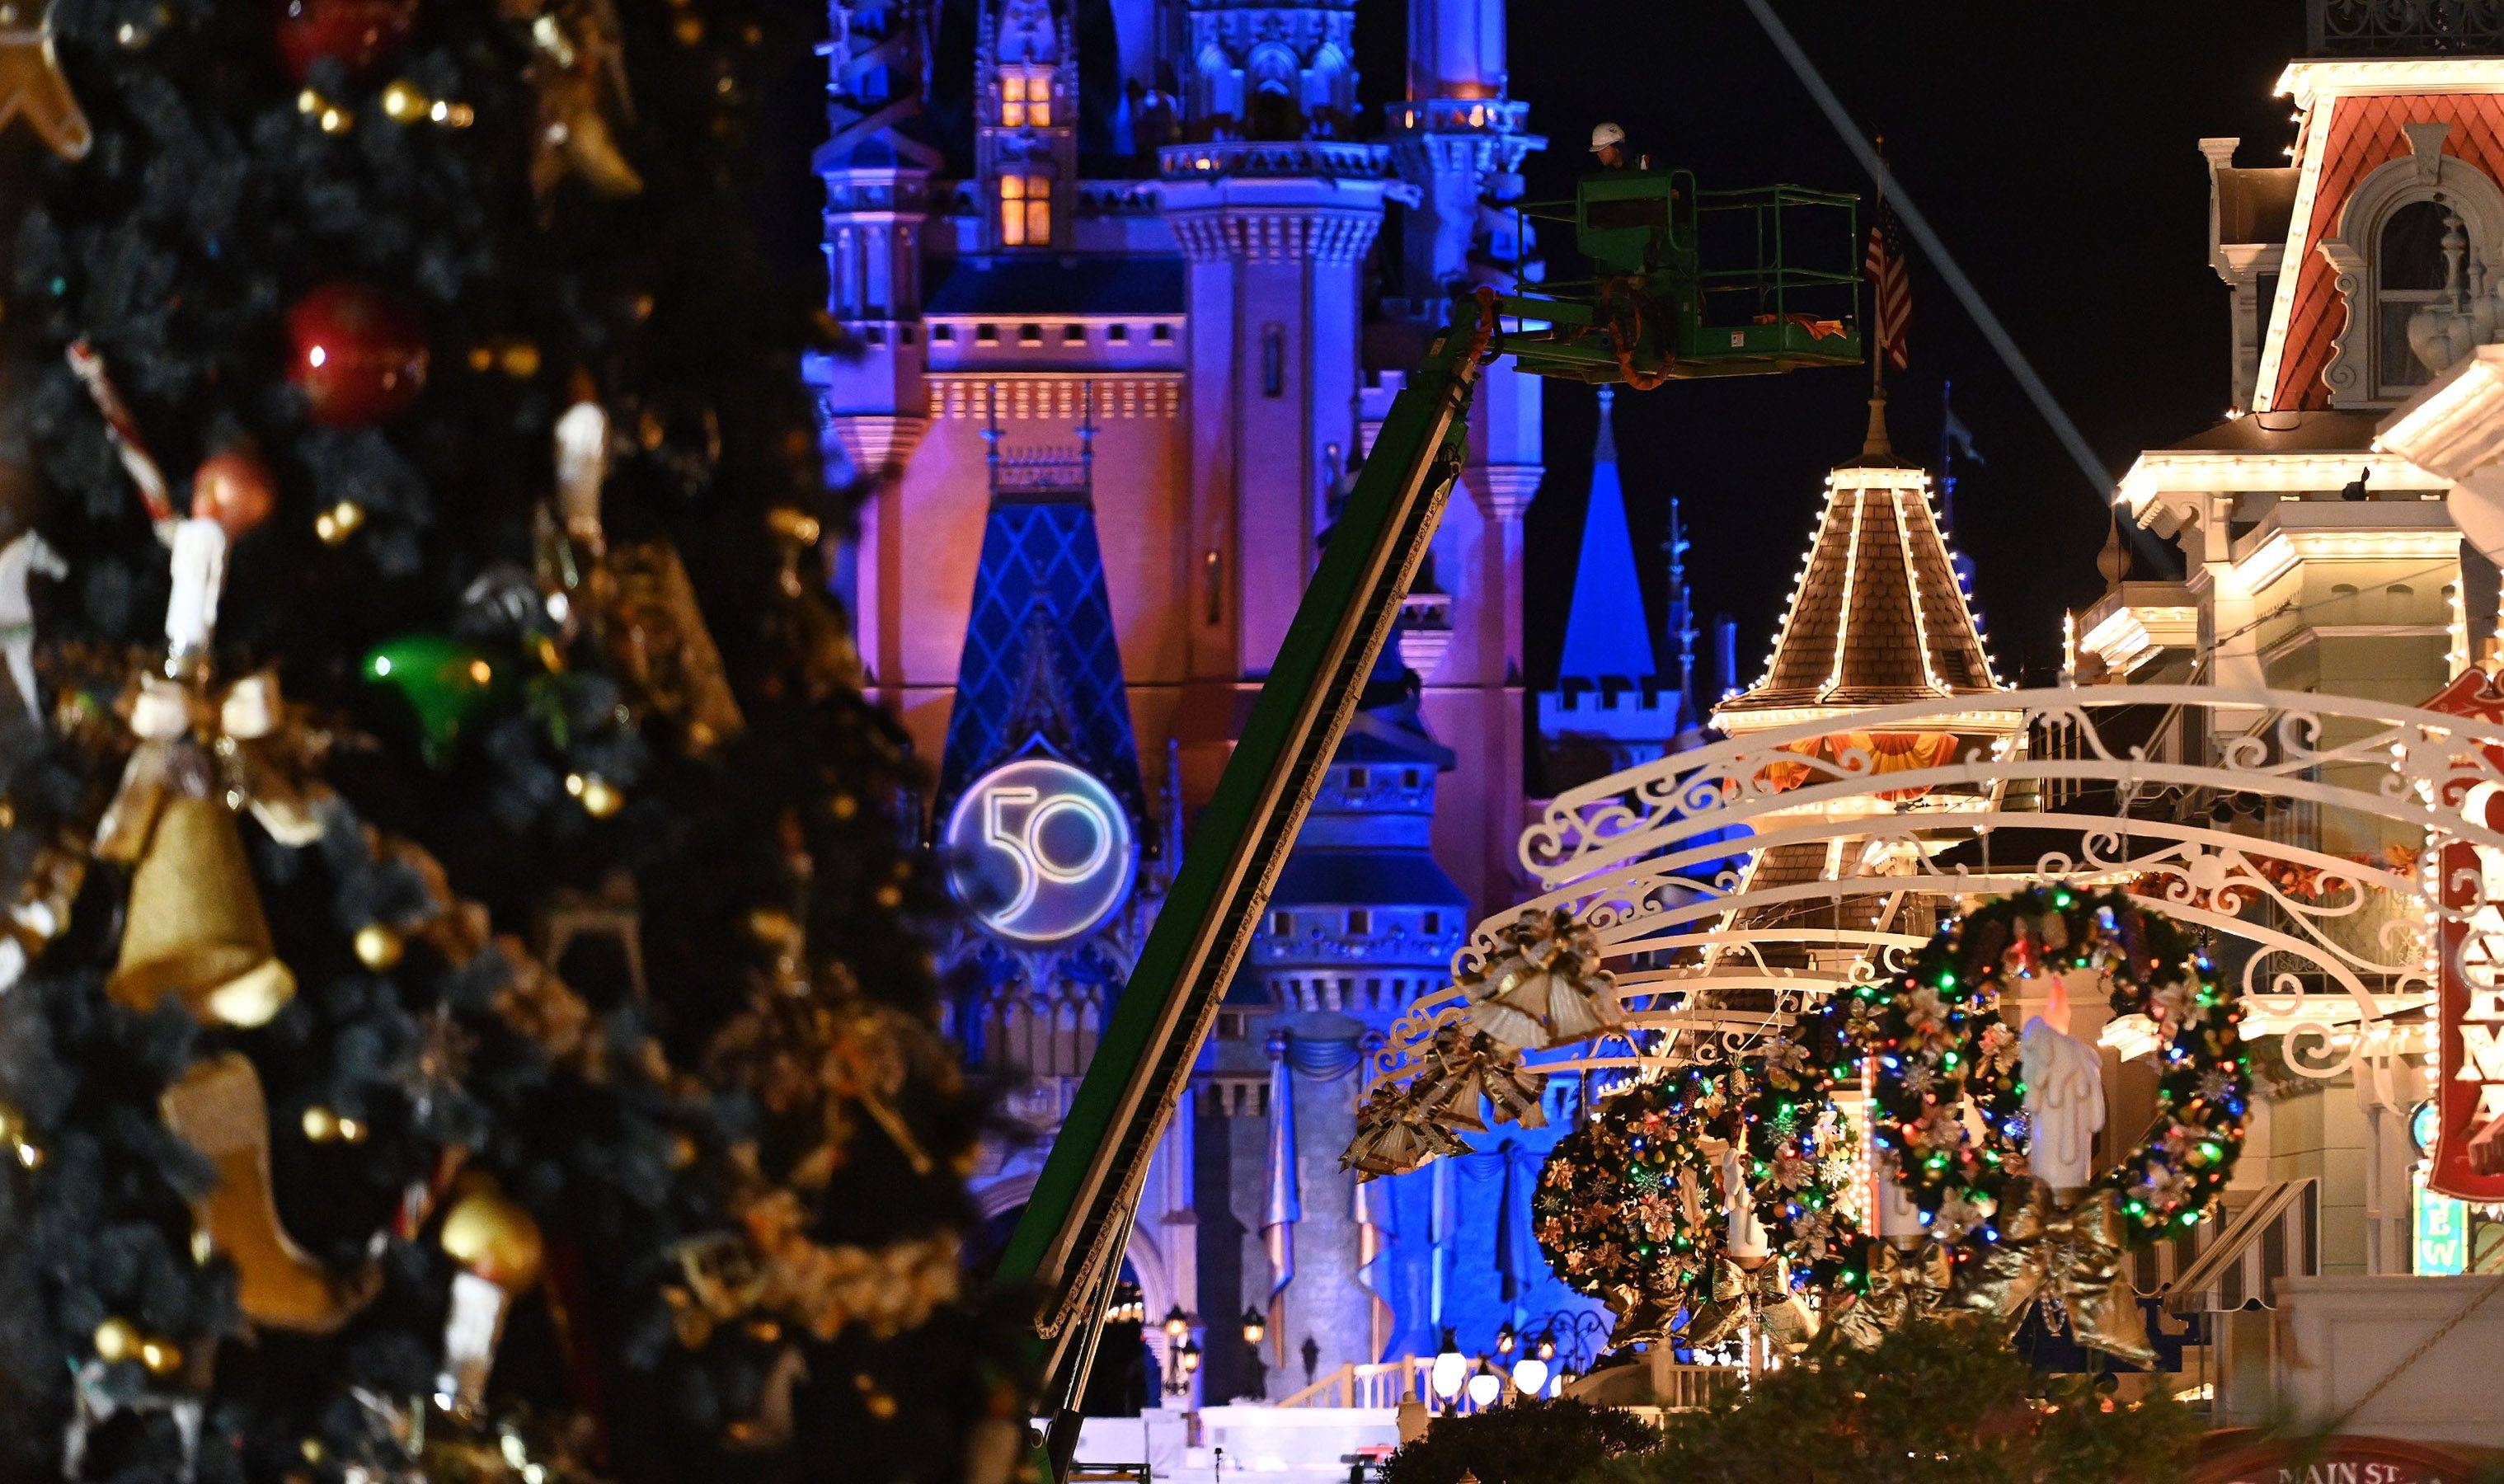 Overnight transformation of Magic Kingdom from Halloween to Christmas Holidays